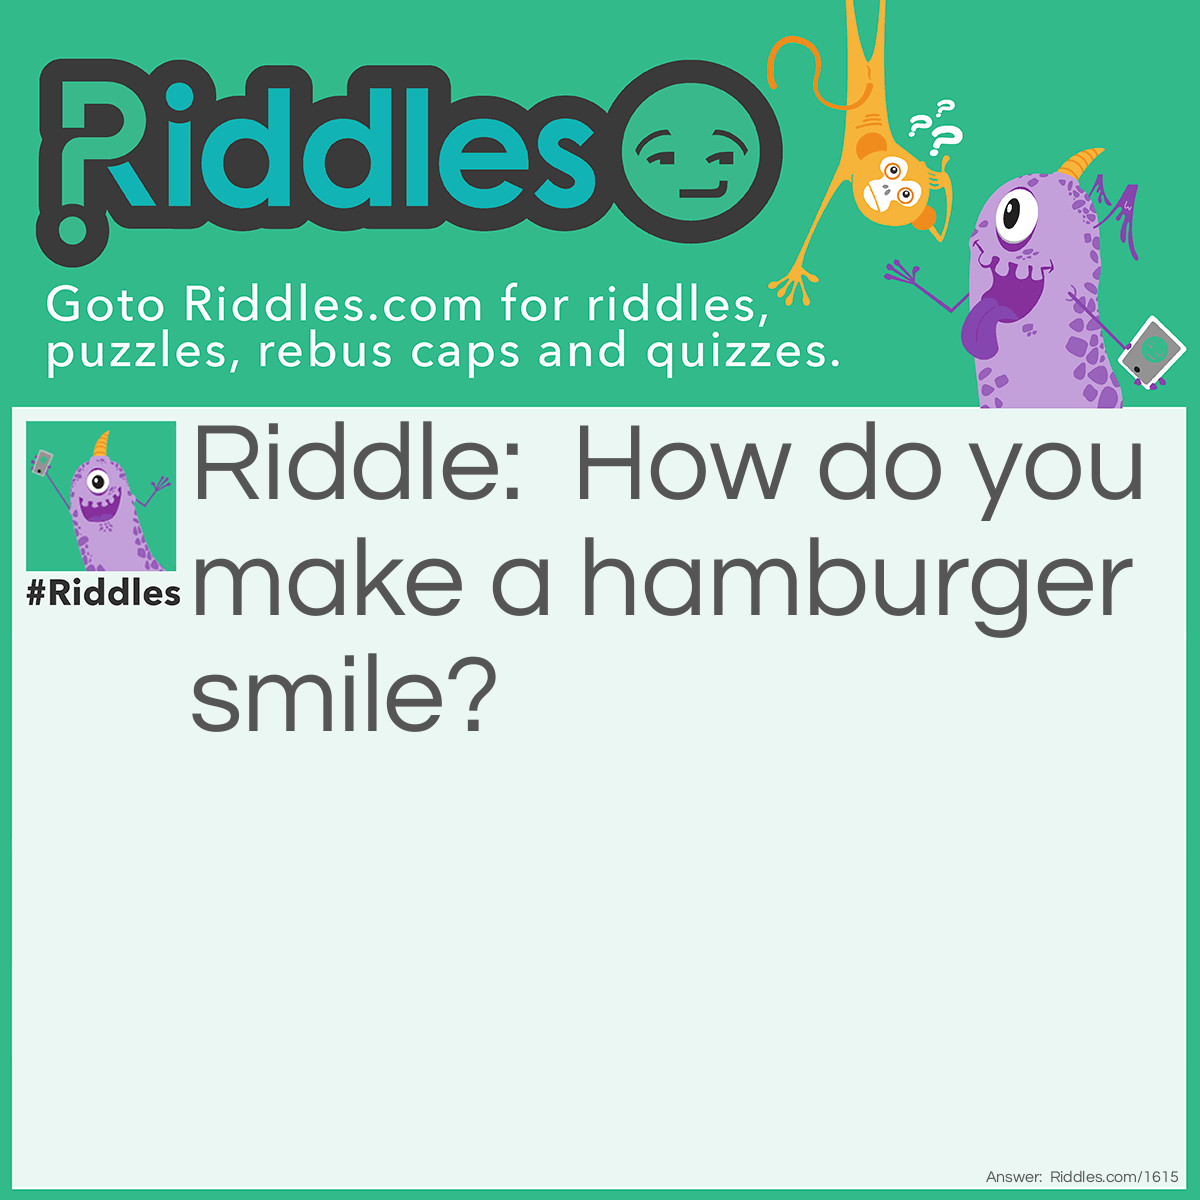 Riddle: How do you make a hamburger smile? Answer: Pickle it gently.